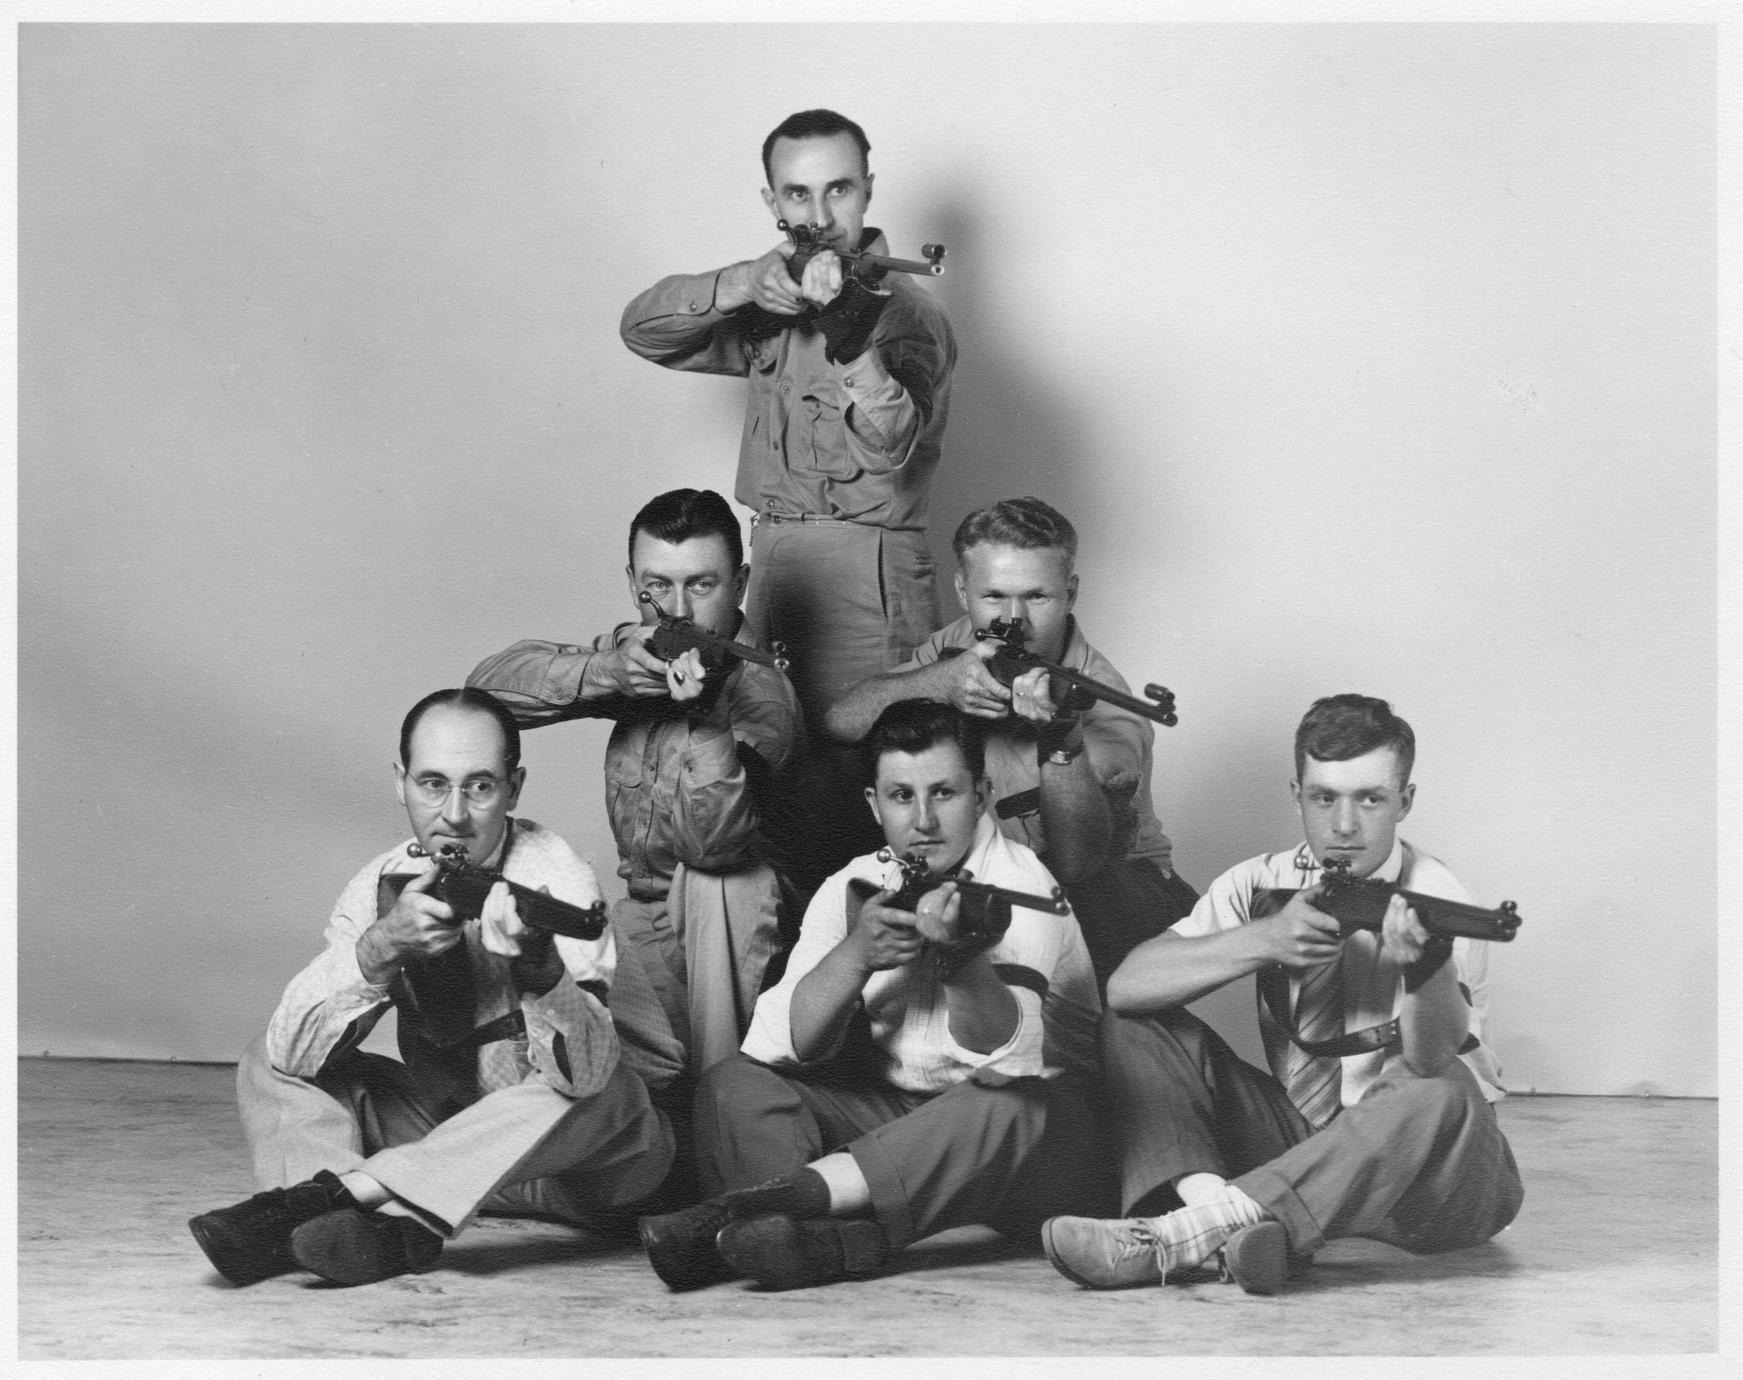 Janesville Rifle Team, 1937 and 1944 (1 of 2)